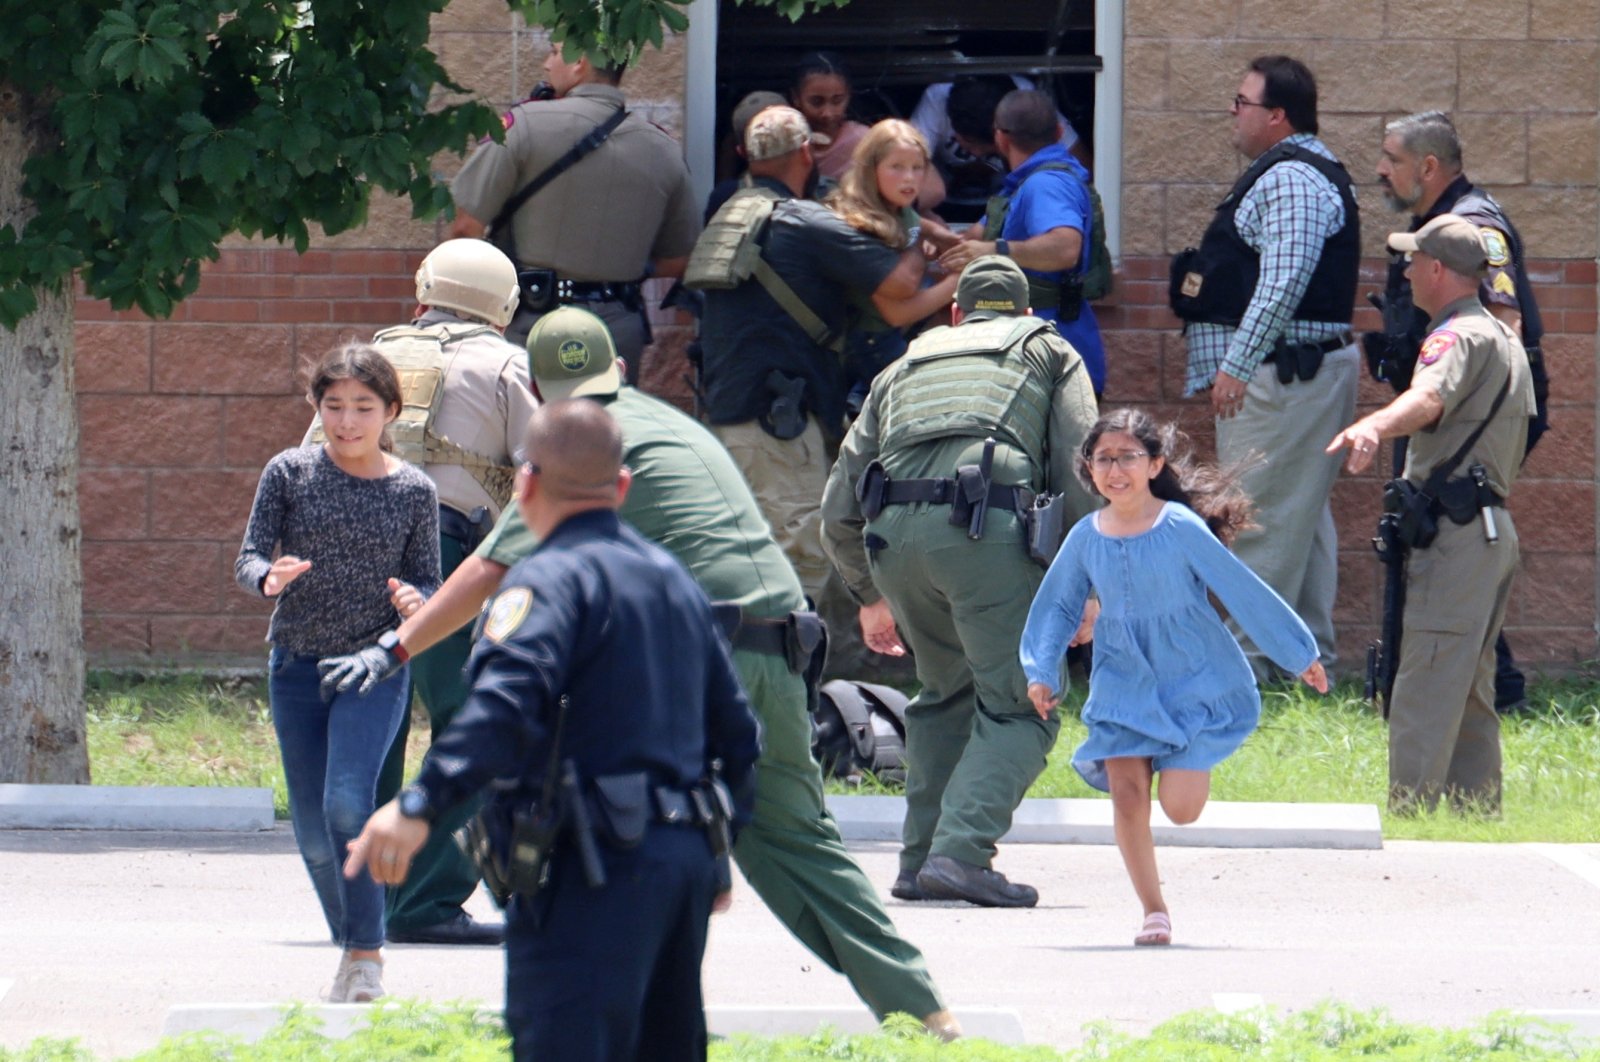 Children run to safety after escaping from a window during a mass shooting at Robb Elementary School where a gunman killed 19 children and two adults in Uvalde, Texas, U.S., May 24, 2022. (Uvalde Leader-News via Reuters)